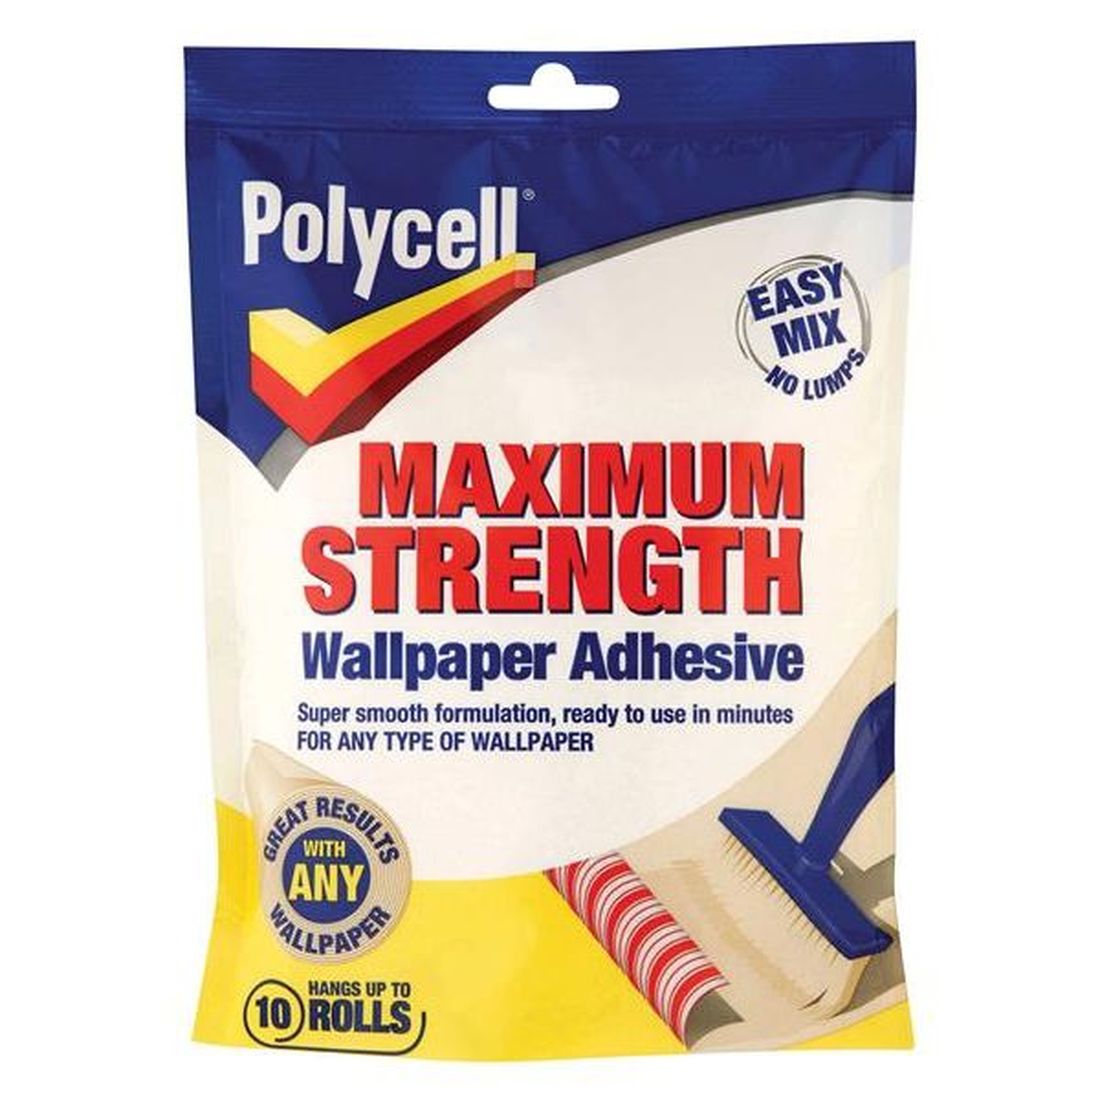 Polycell Maximum Strength Wallpaper Adhesive 10 Roll                                     